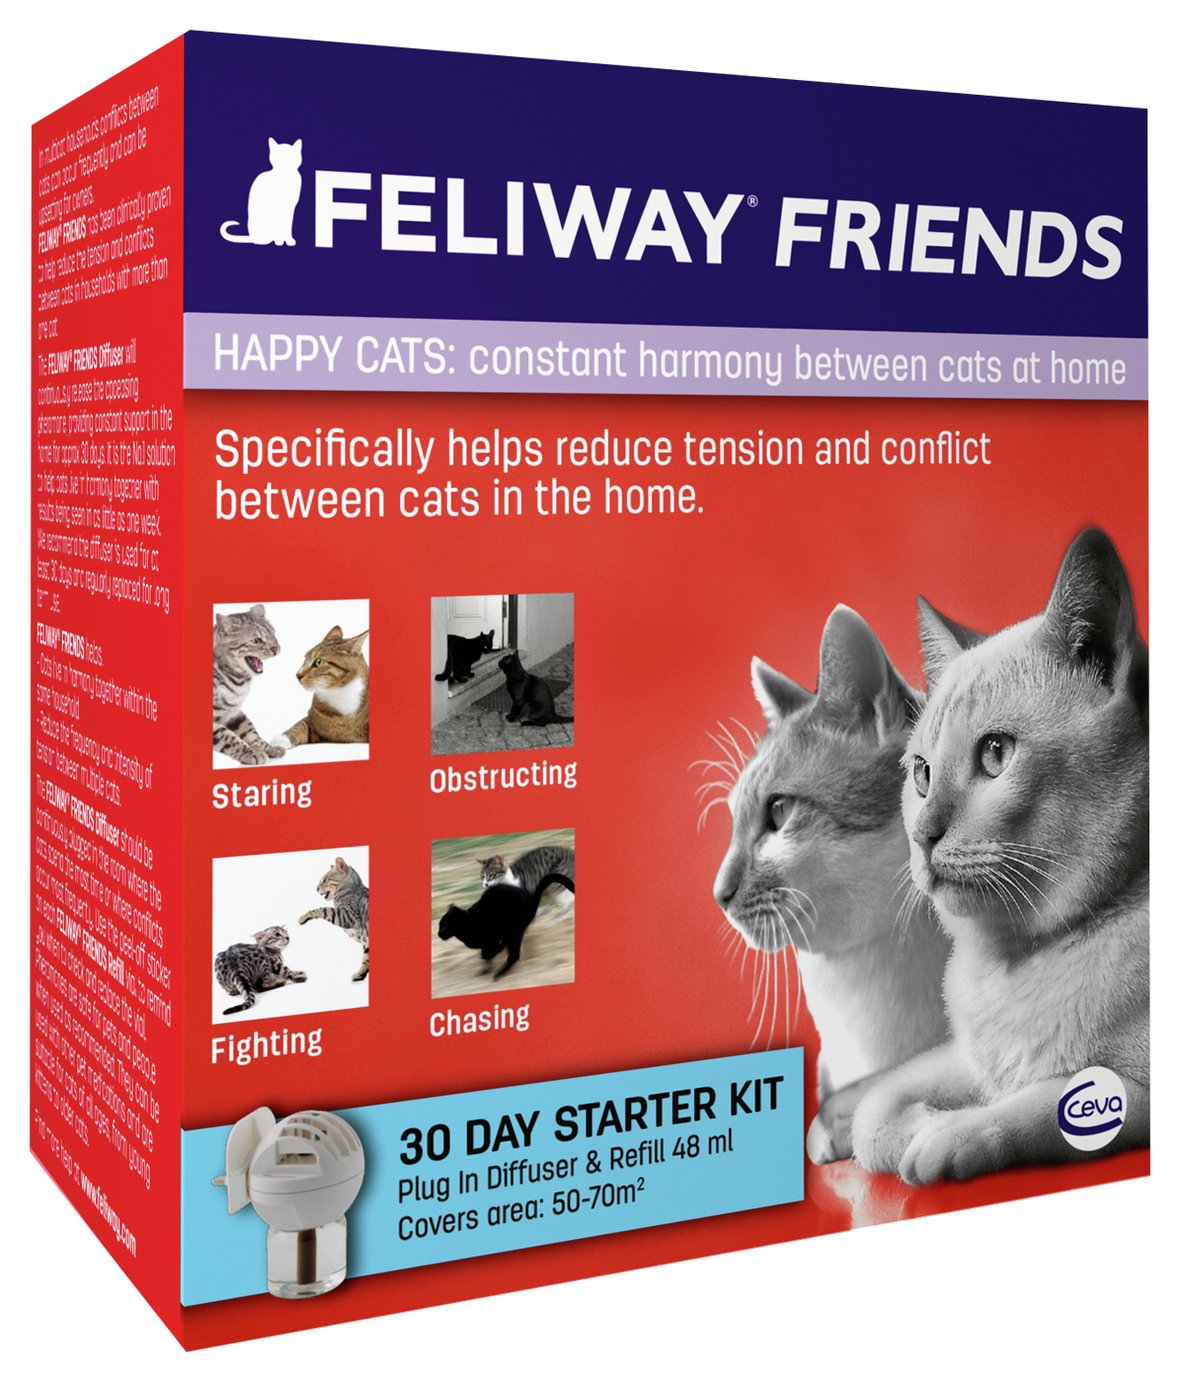 How to use a FELIWAY FRIENDS Diffuser 